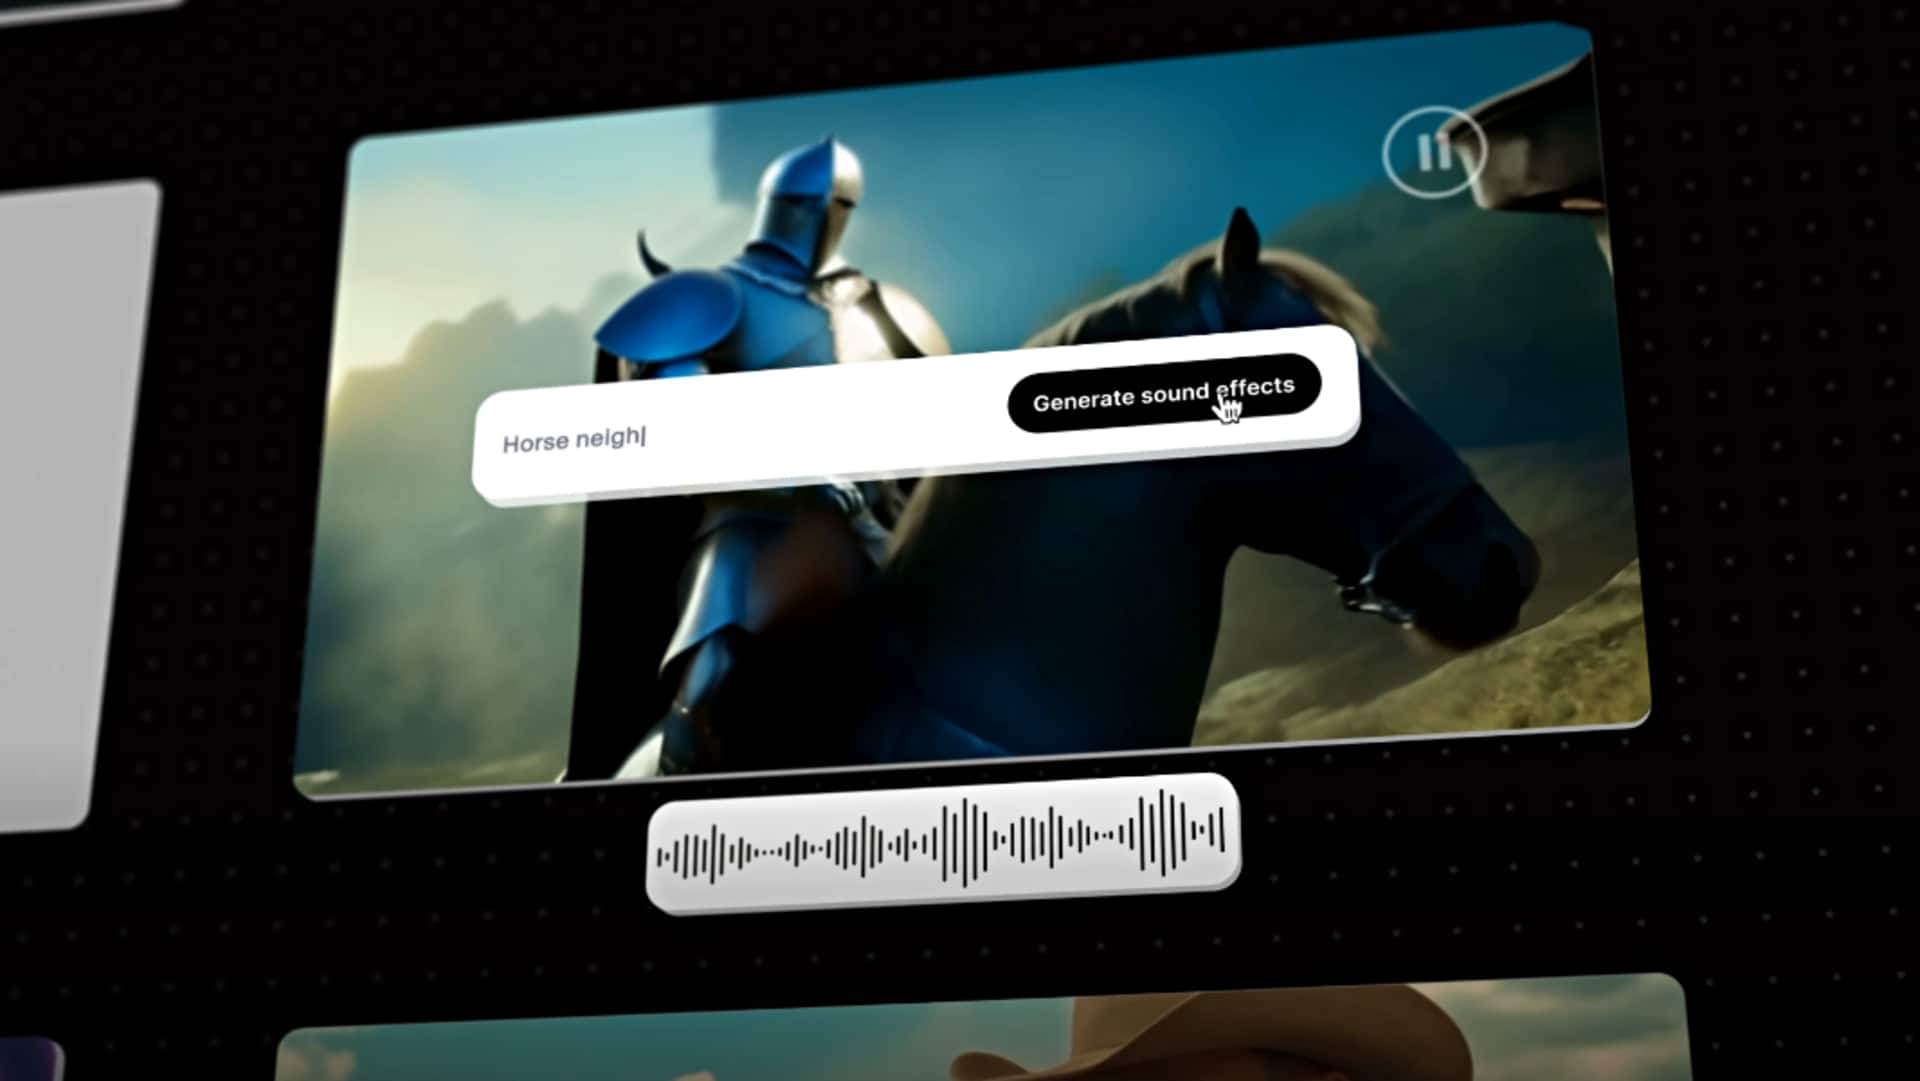 ElevenLabs's new AI tool generates sound effects using prompts